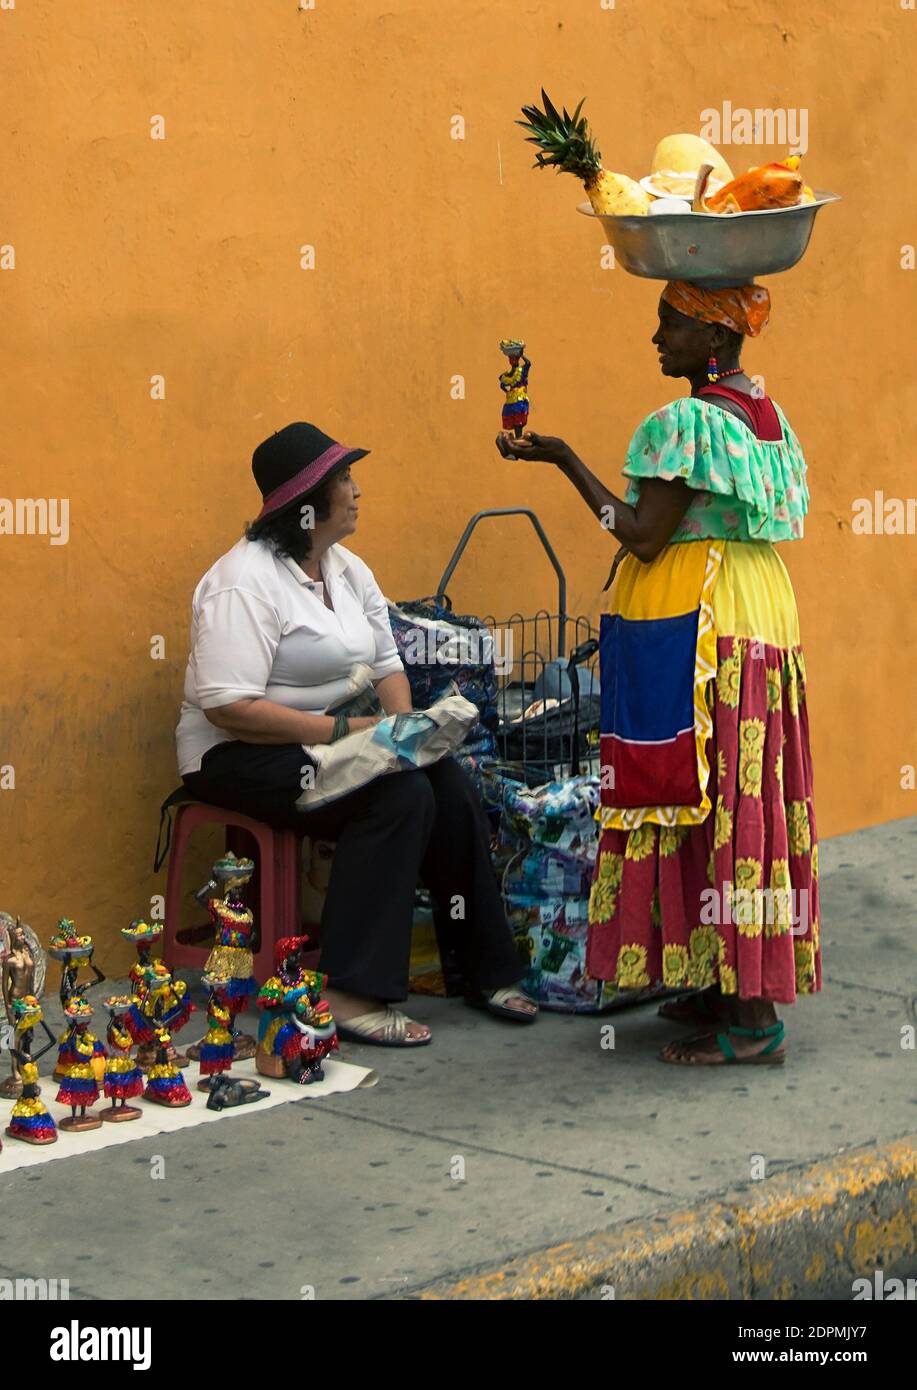 Palenquera has a laugh at a figurine of herself intended as tourist merchandise in Cartagena de Indias Stock Photo